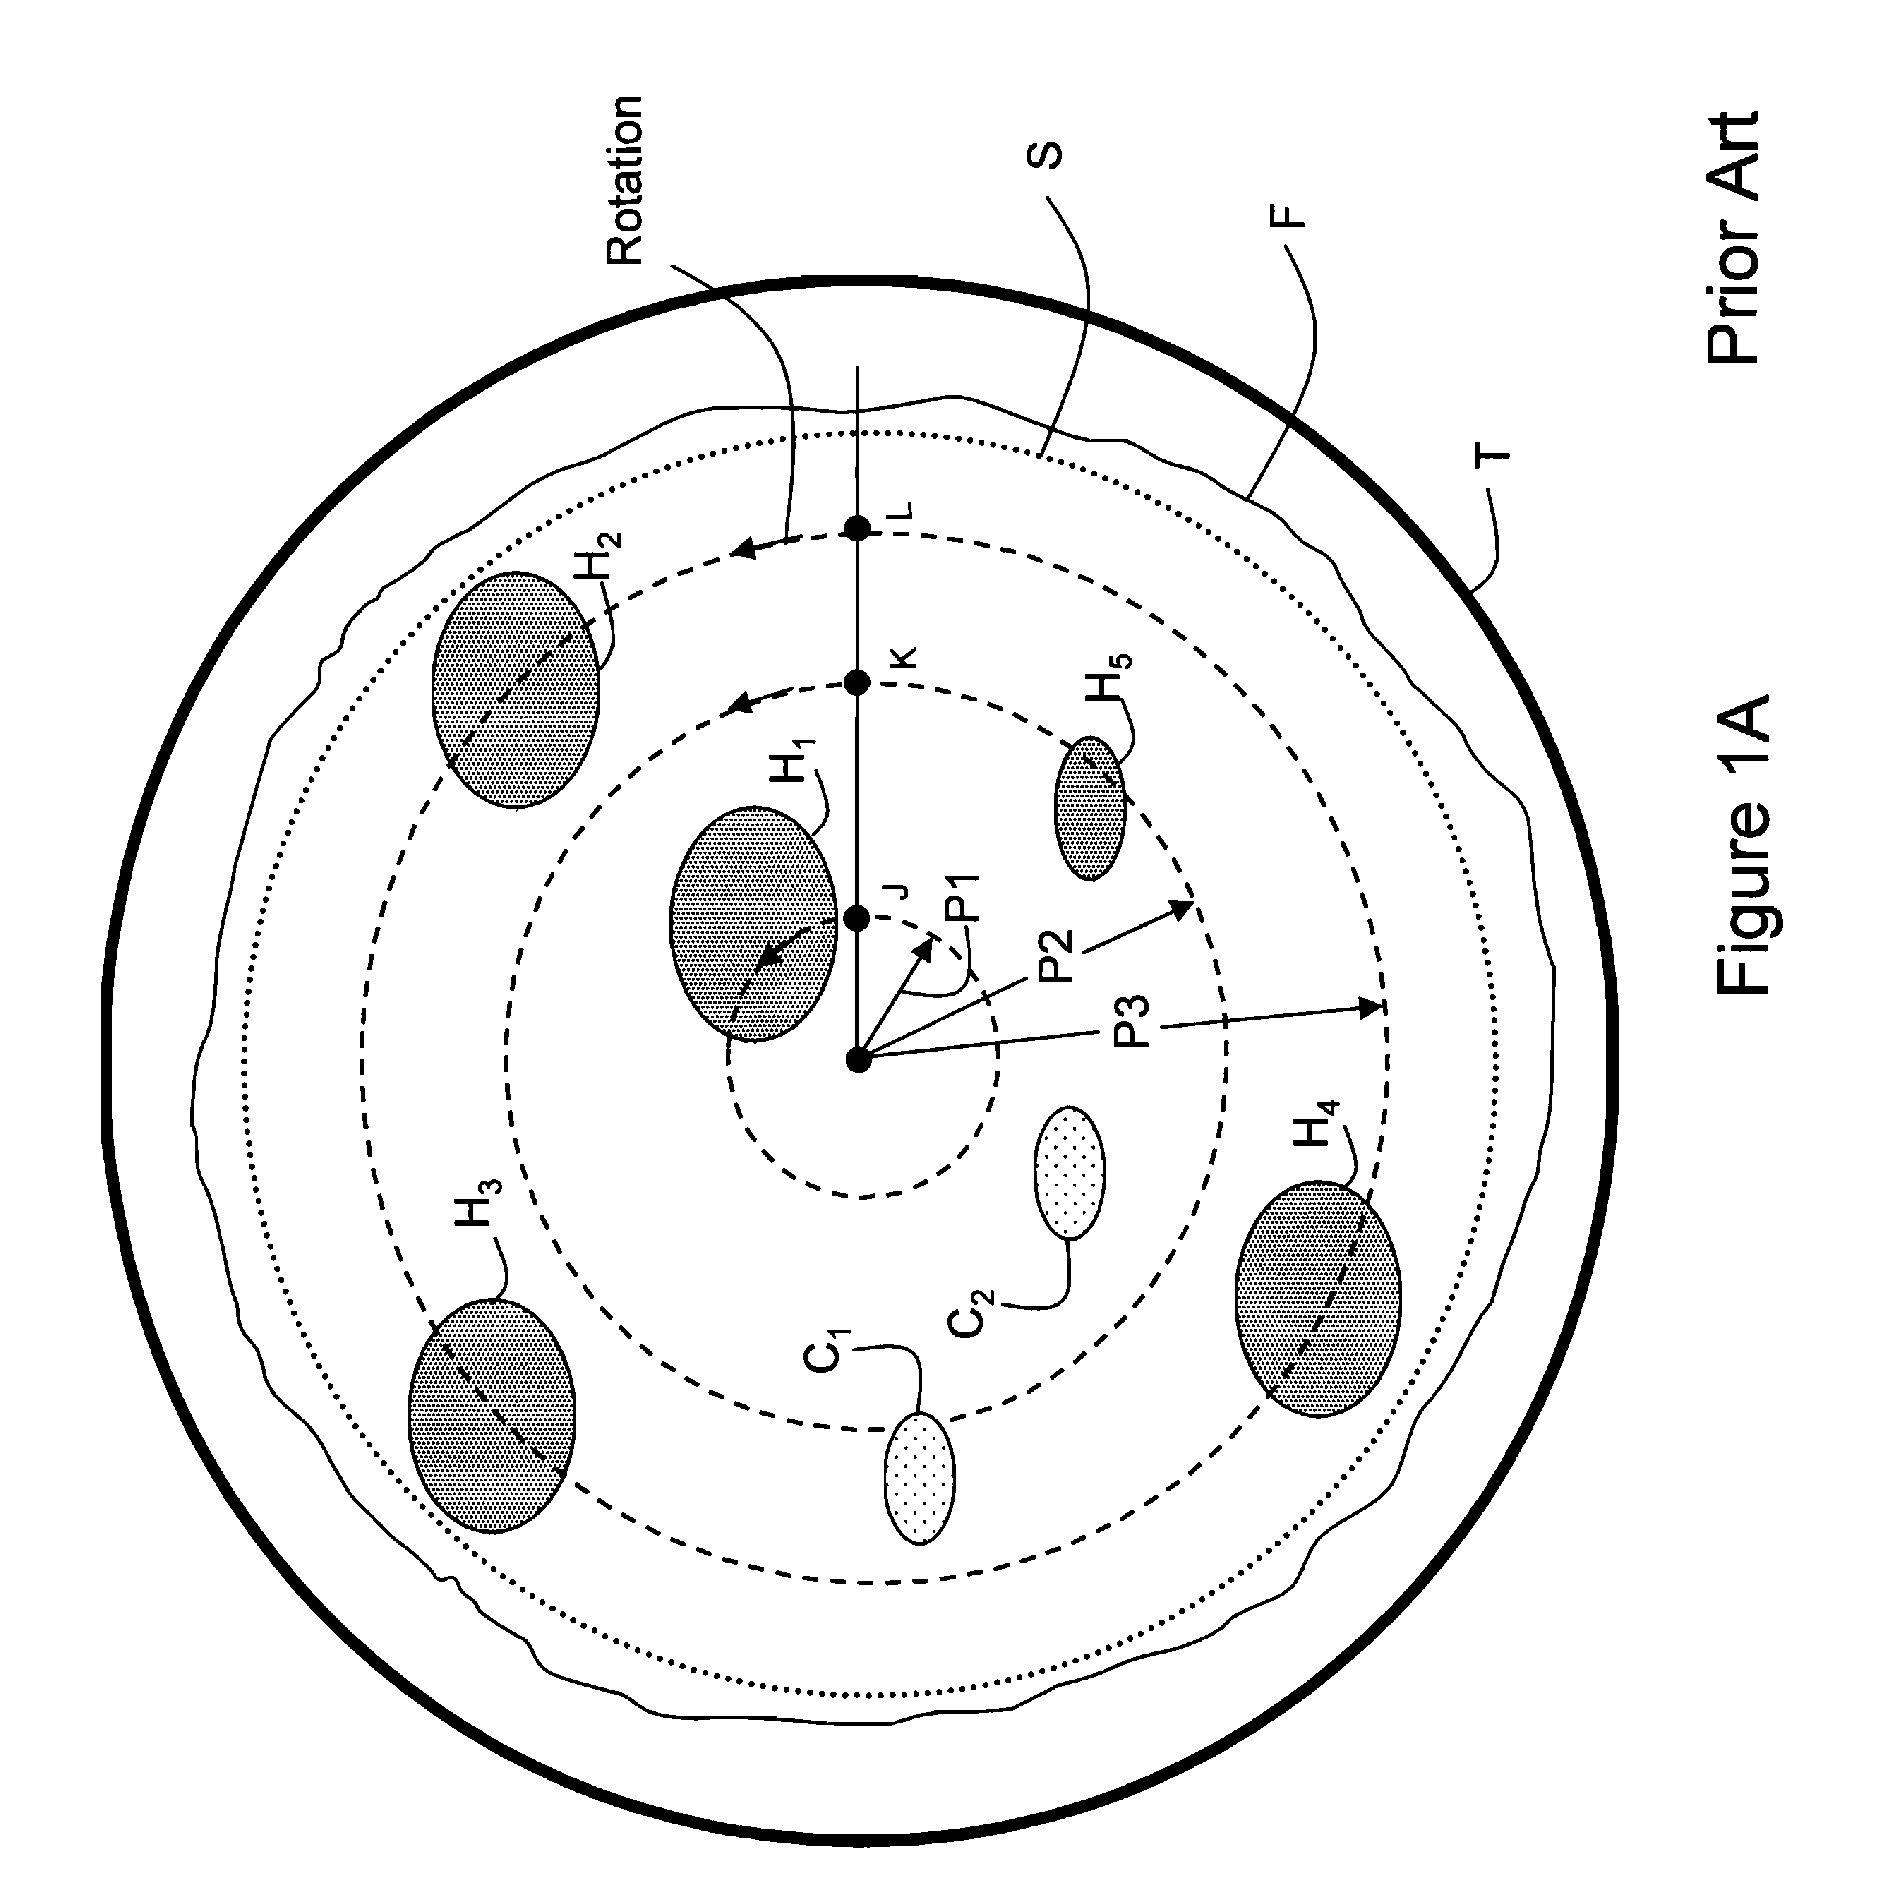 Microwave Field Director Structure Having V-Shaped Vane Doublets